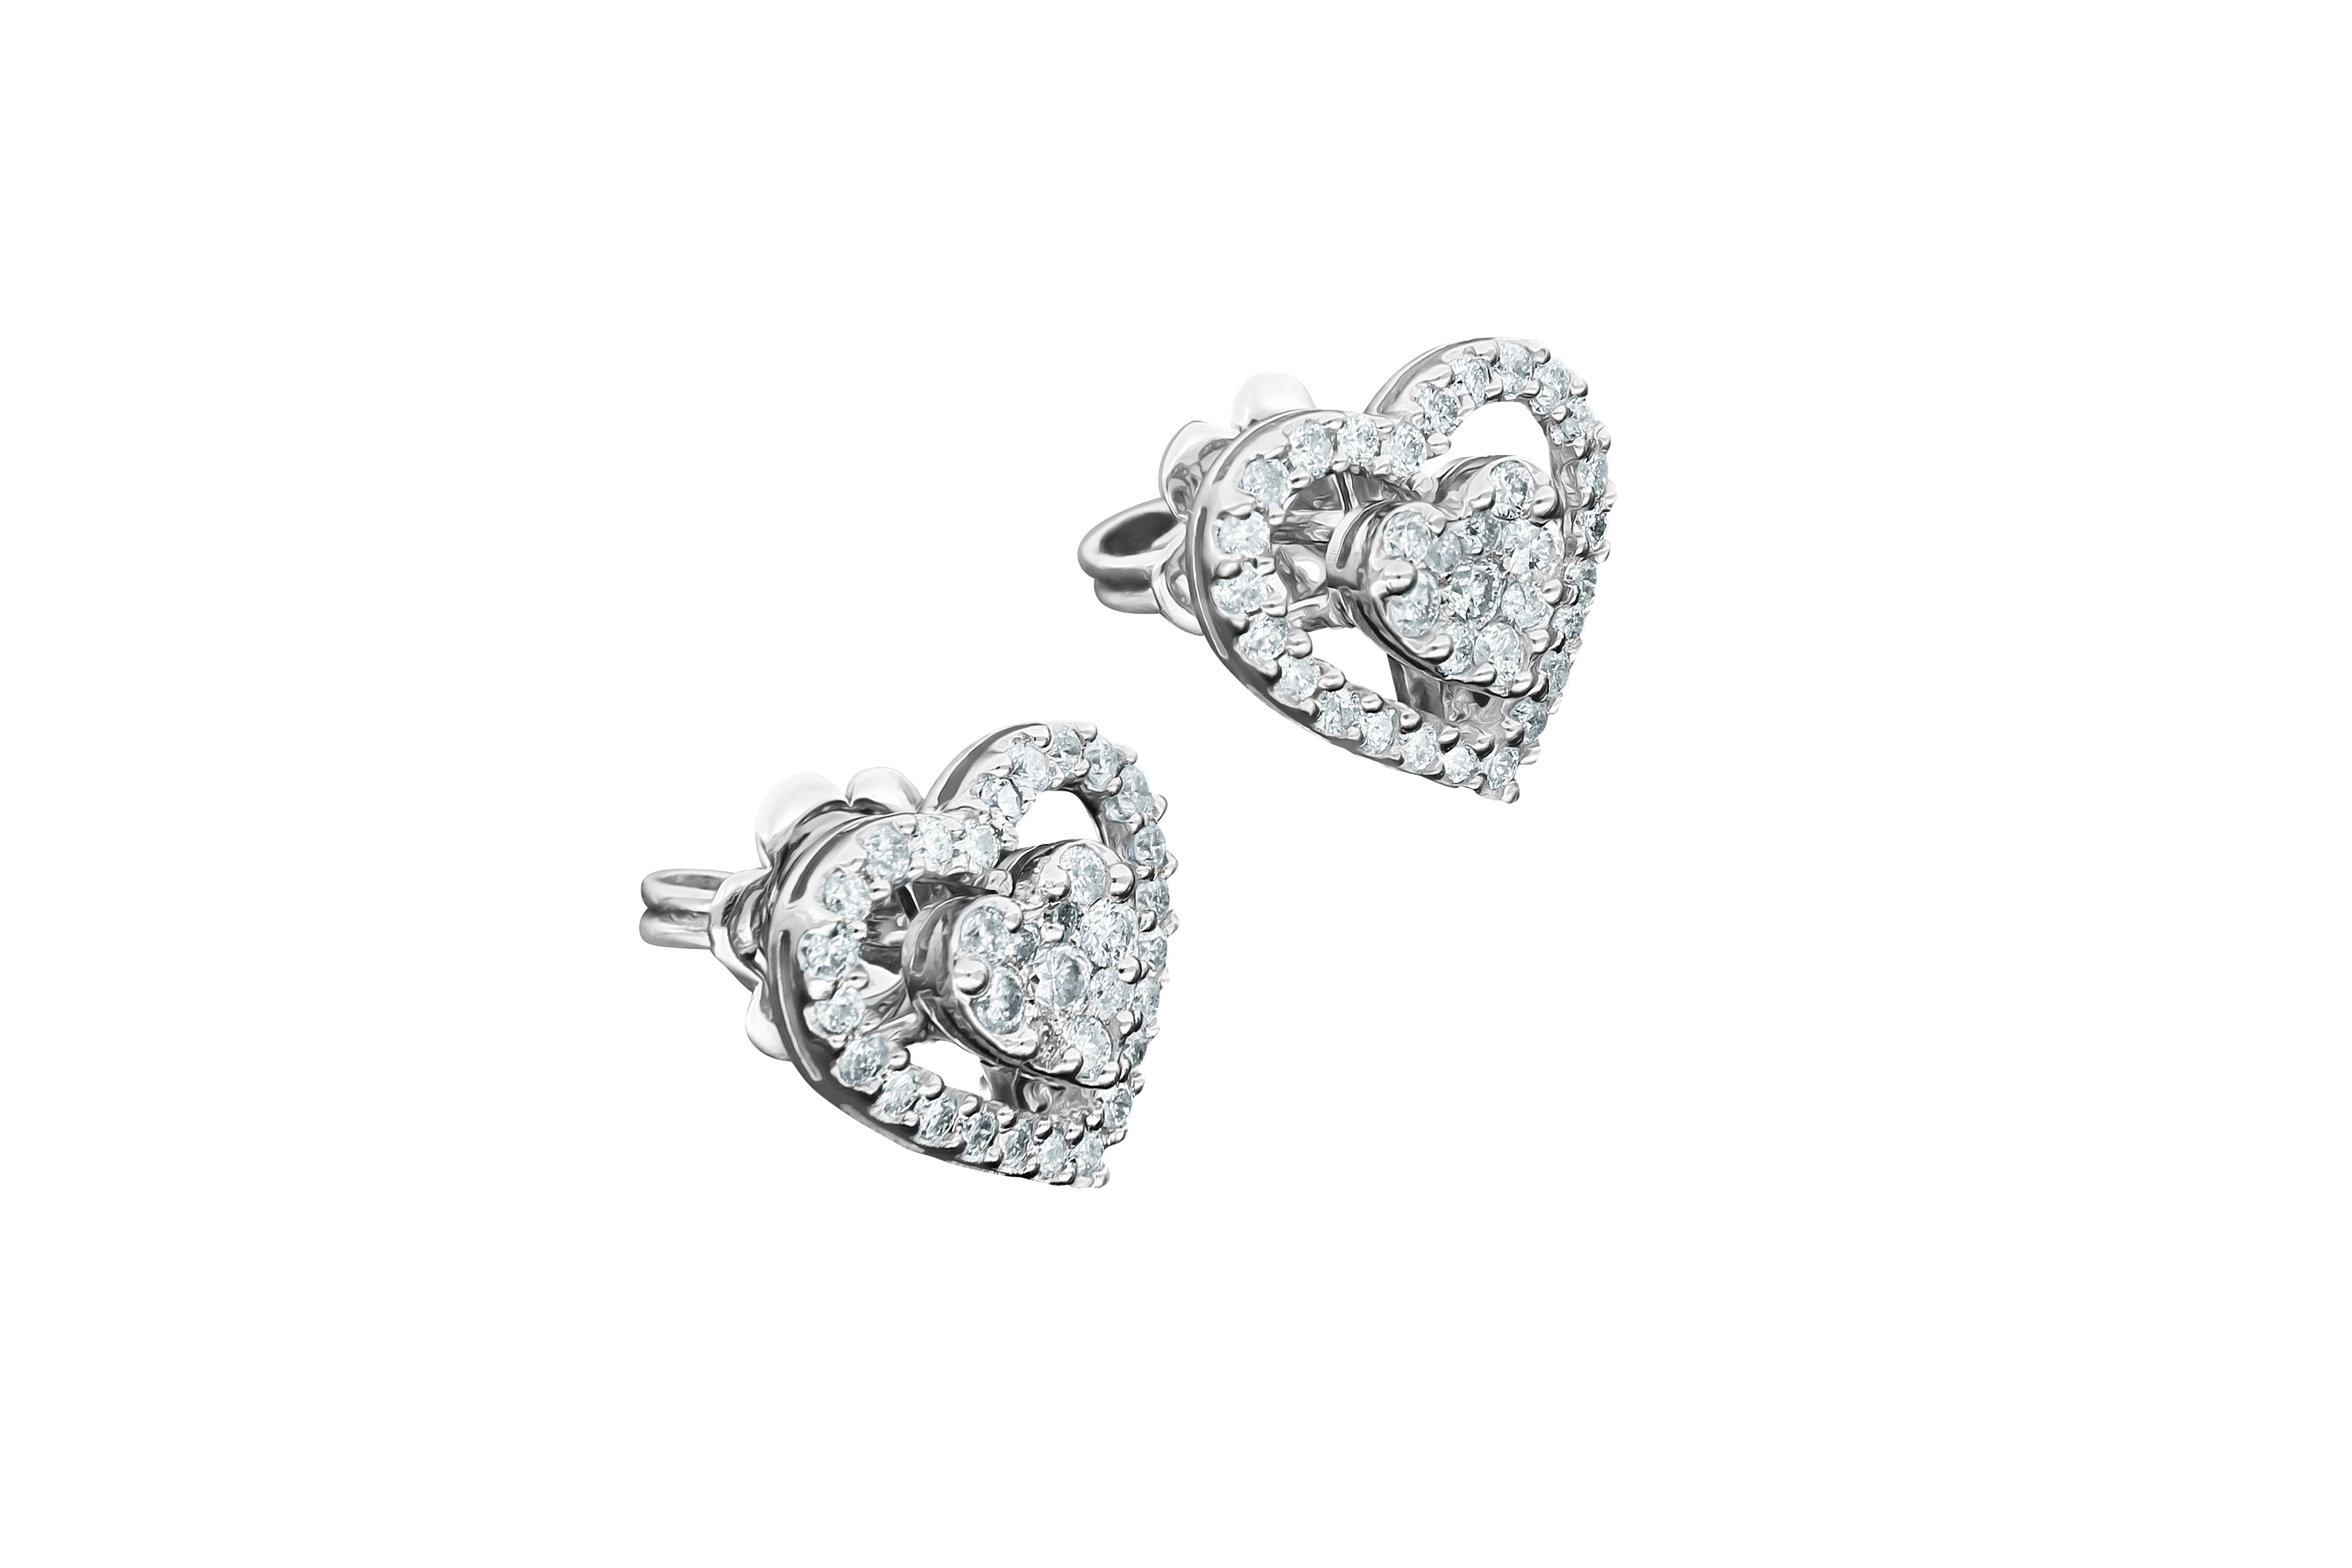  Classy, romantic 18K White Gold Amwaj earring with Diamonds. For the look that epitomizes love, this round shape Diamond earring each feature a symbolic heart shape surrounded by a halo of shimmering round shape Diamonds. In the heart of our